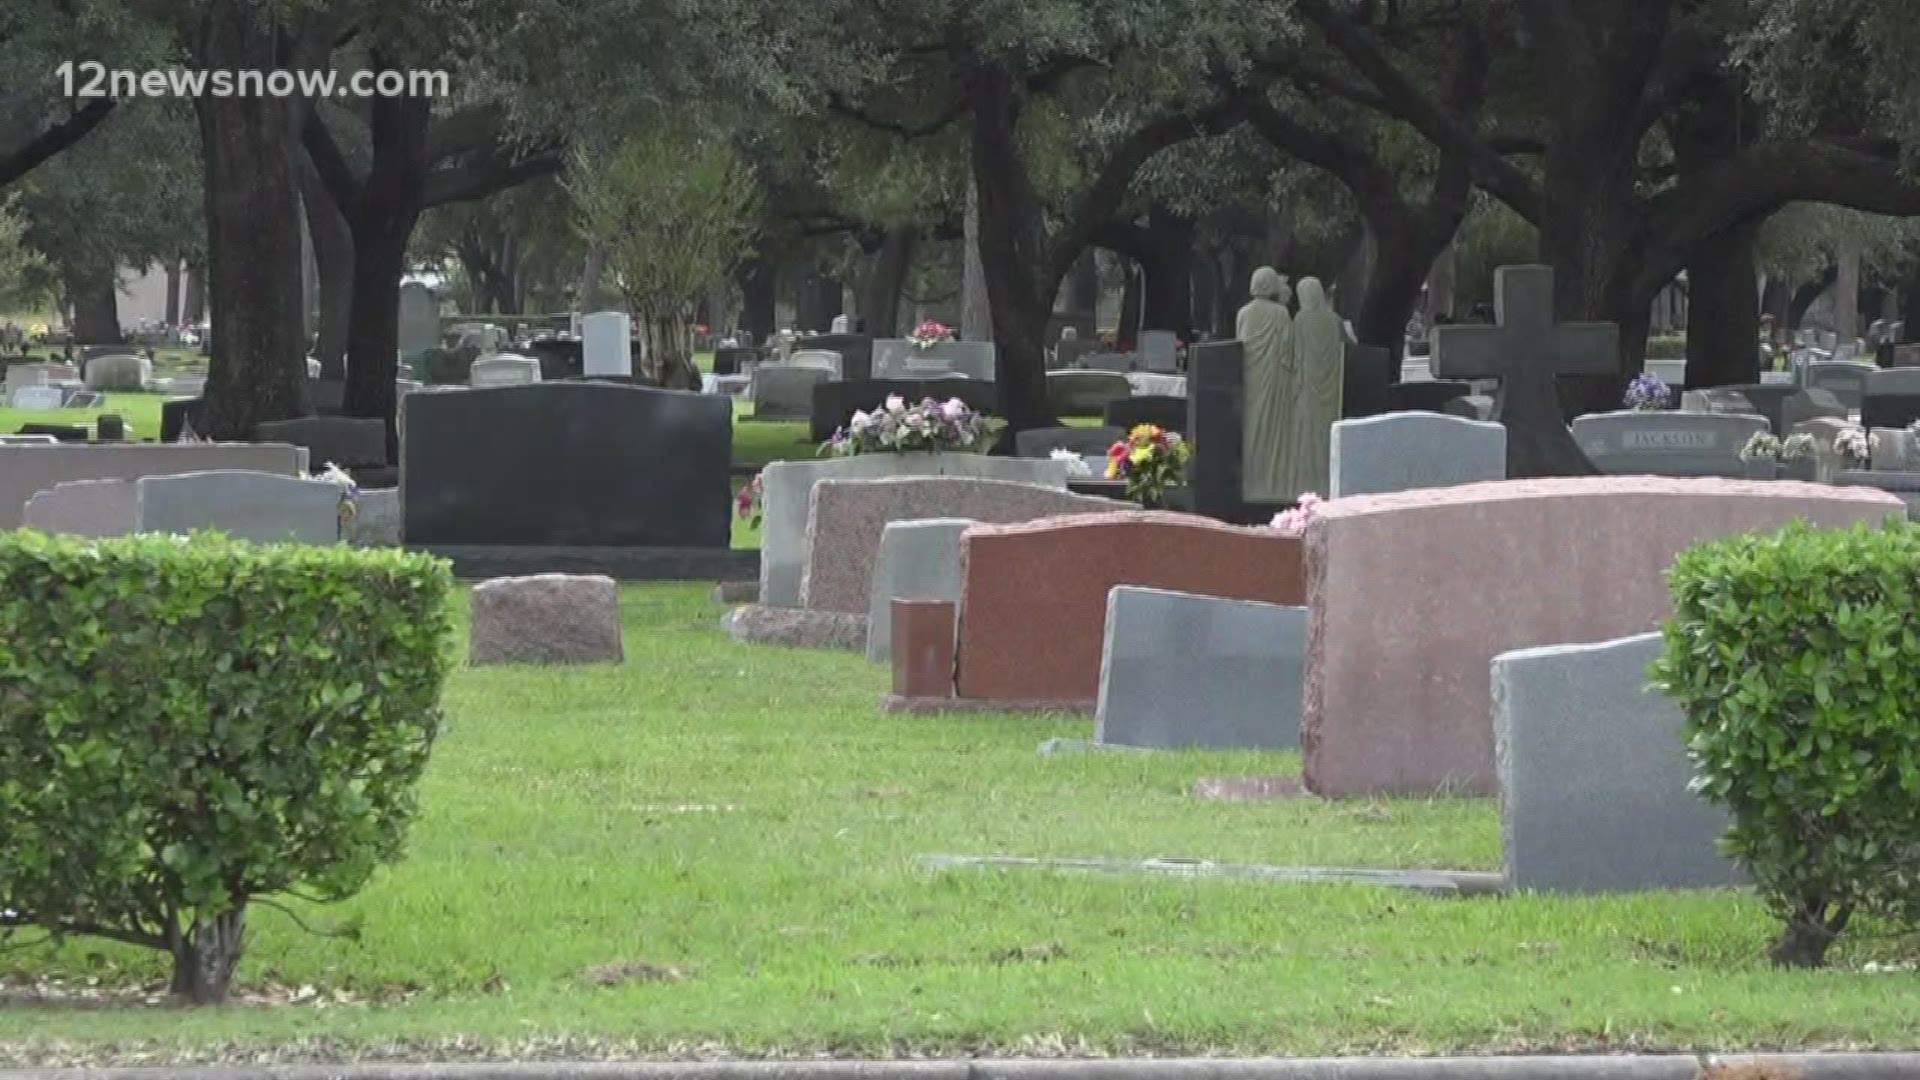 Lady Carlson from Shreveport, Louisiana, says misplaced headstones, unkept lawn care and tire marks have built up her frustration with the cemetery.